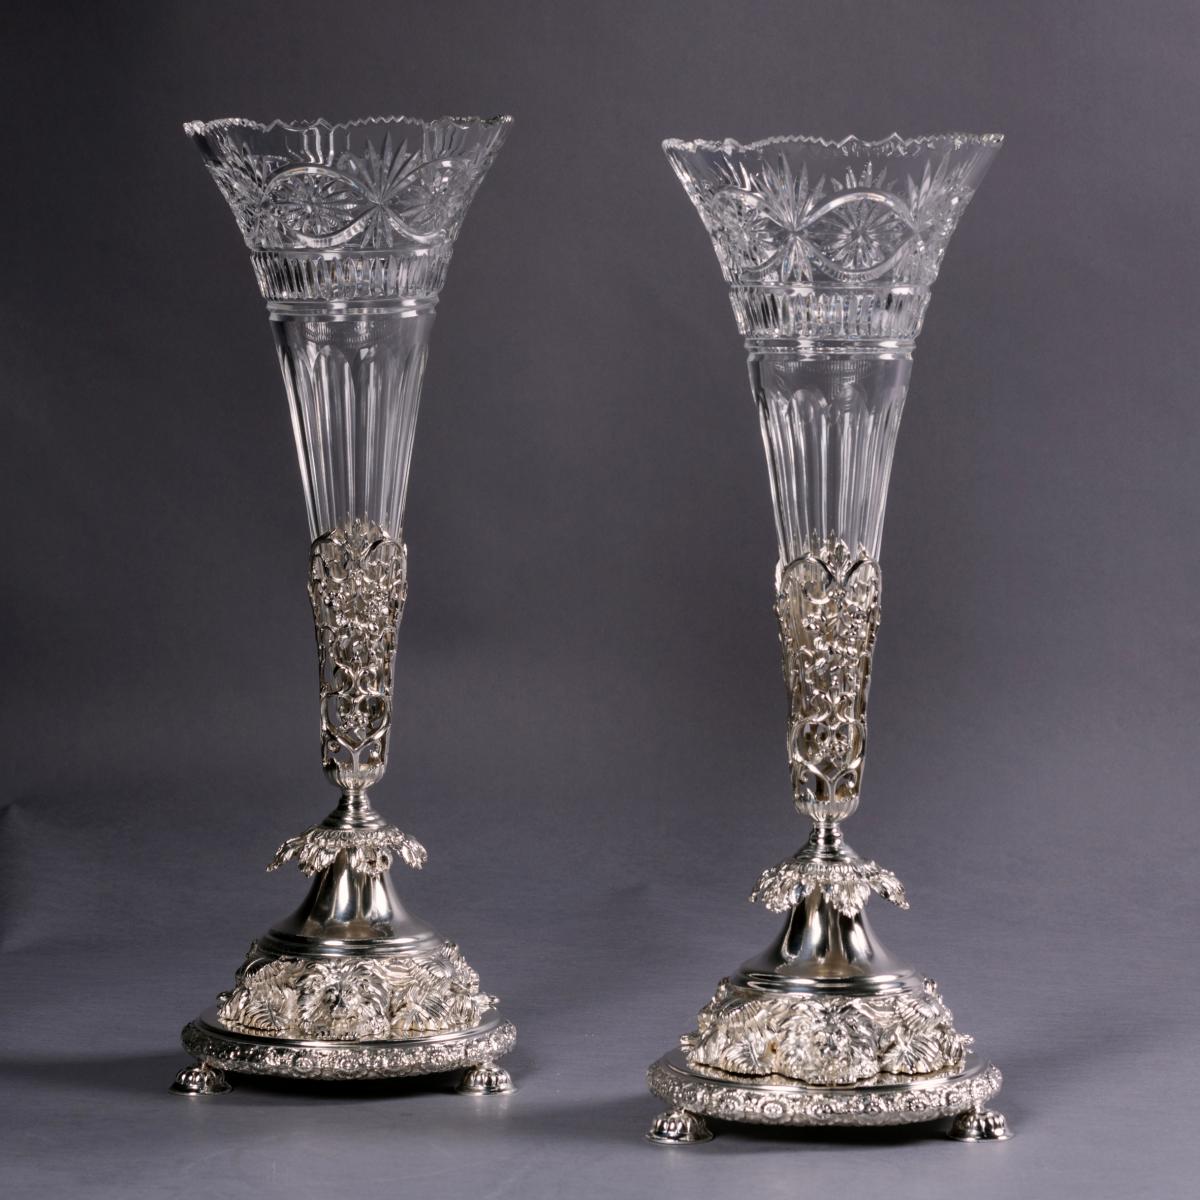  Pair of Victorian Silver-Plated Cut-Glass Vases, By Joseph Rodgers & Sons 